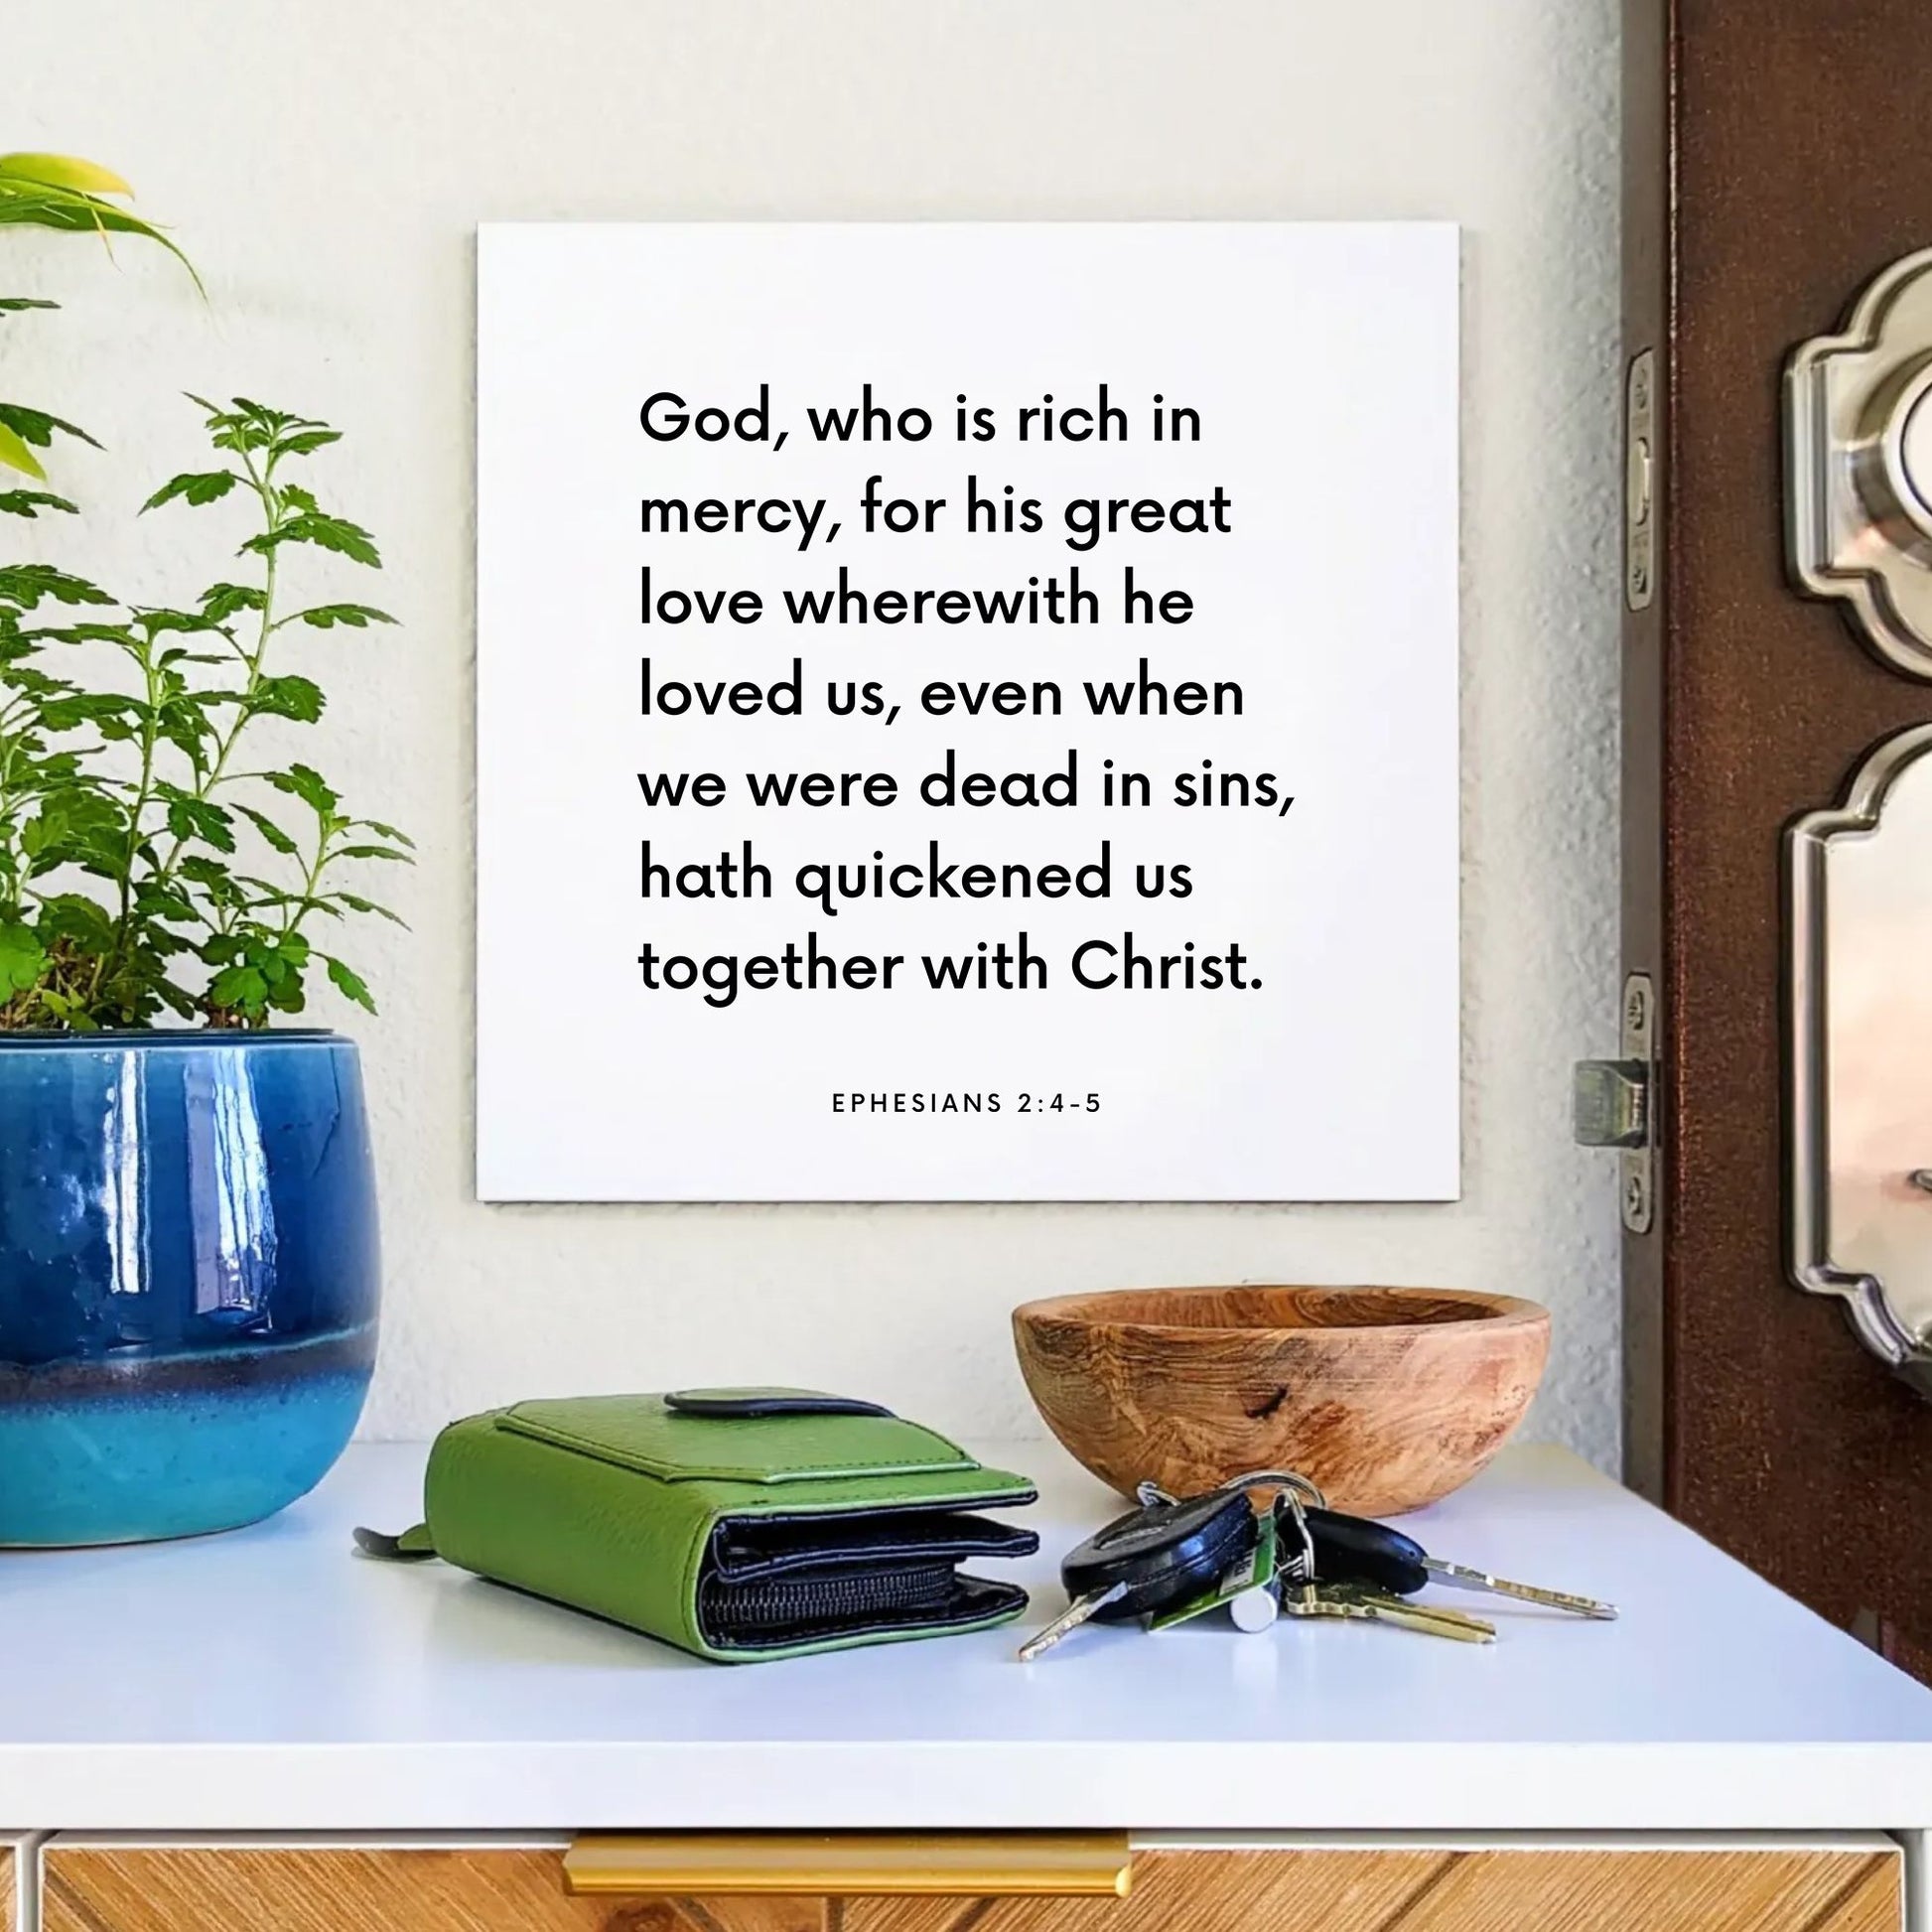 Entryway mouting of the scripture tile for Ephesians 2:4-5 - "God, who is rich in mercy"